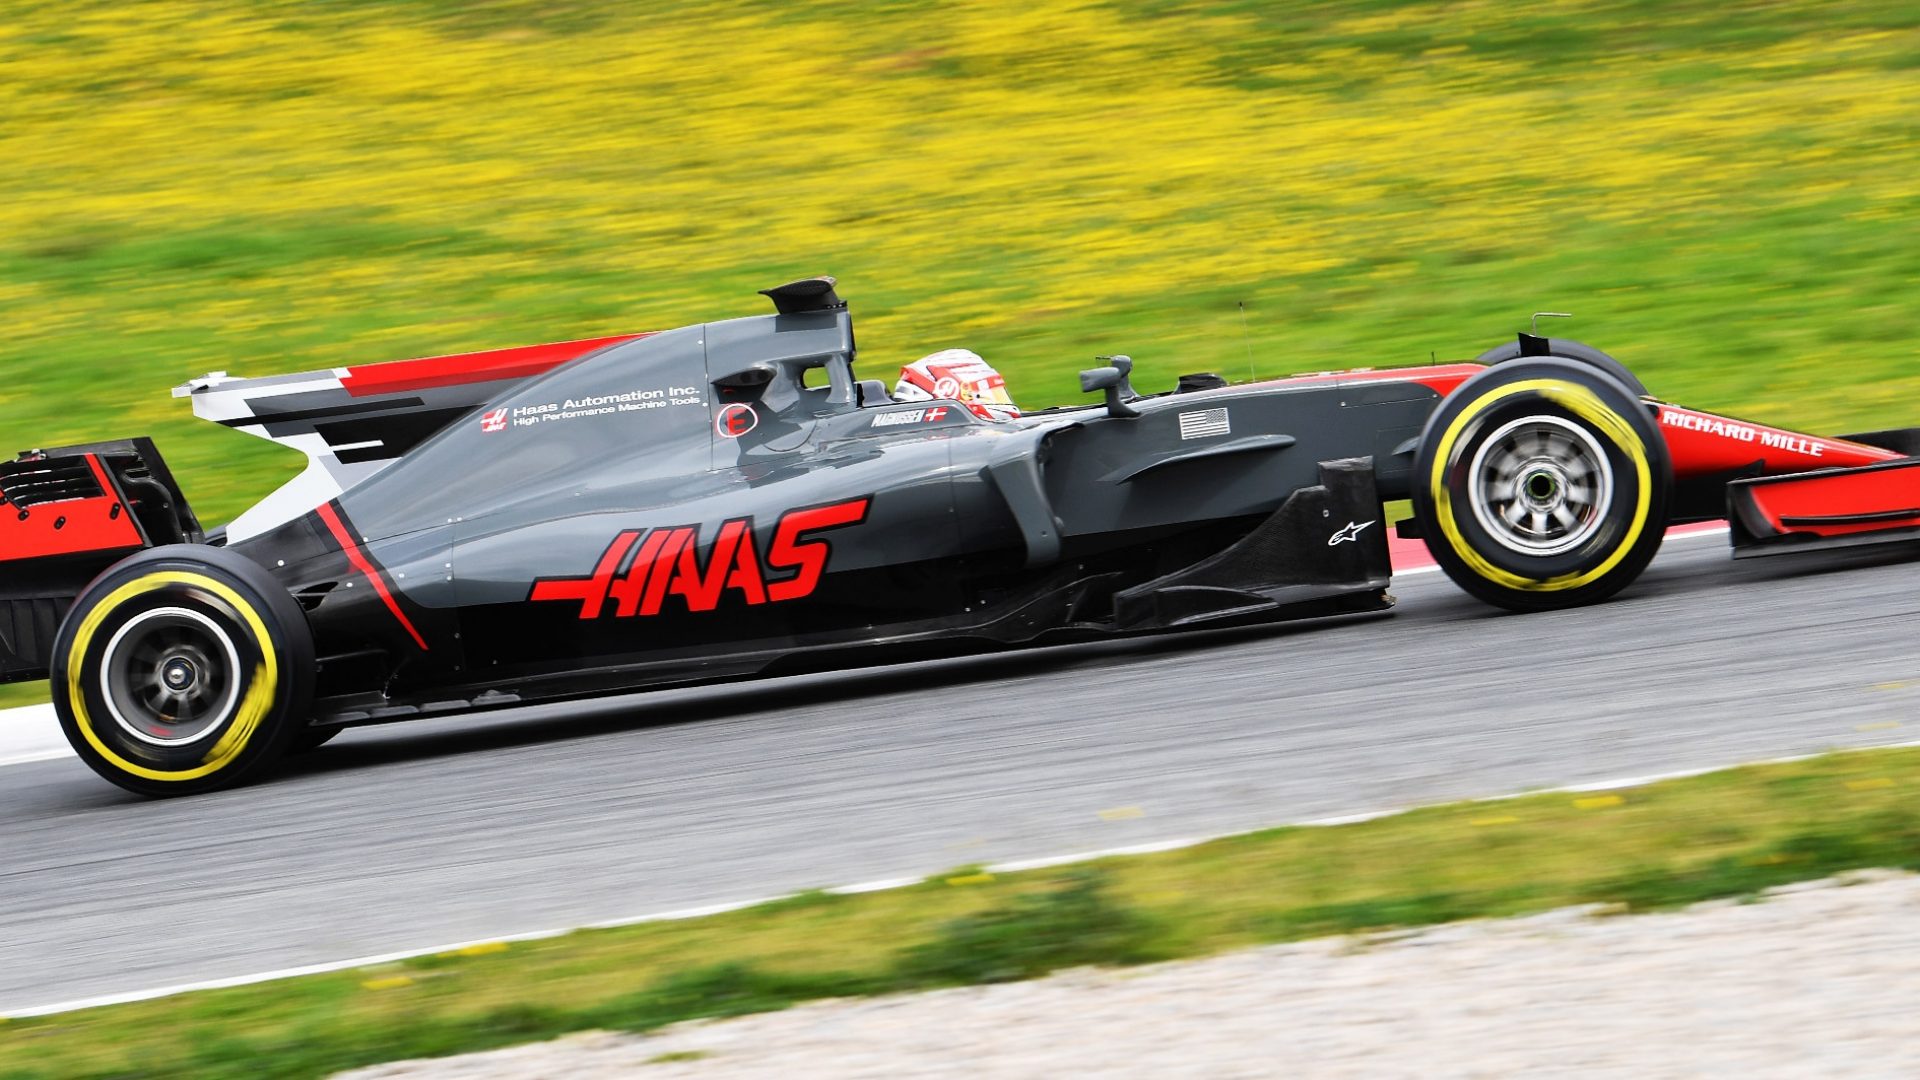 The only American team on the Formula One circuit, Haas Racing is an easy team to root for. They were a brand new team in 2016, and like Renault, our expectations should be set accordingly. With a Ferrari engine underneath, however, we could be surprised by the red, white and blue.